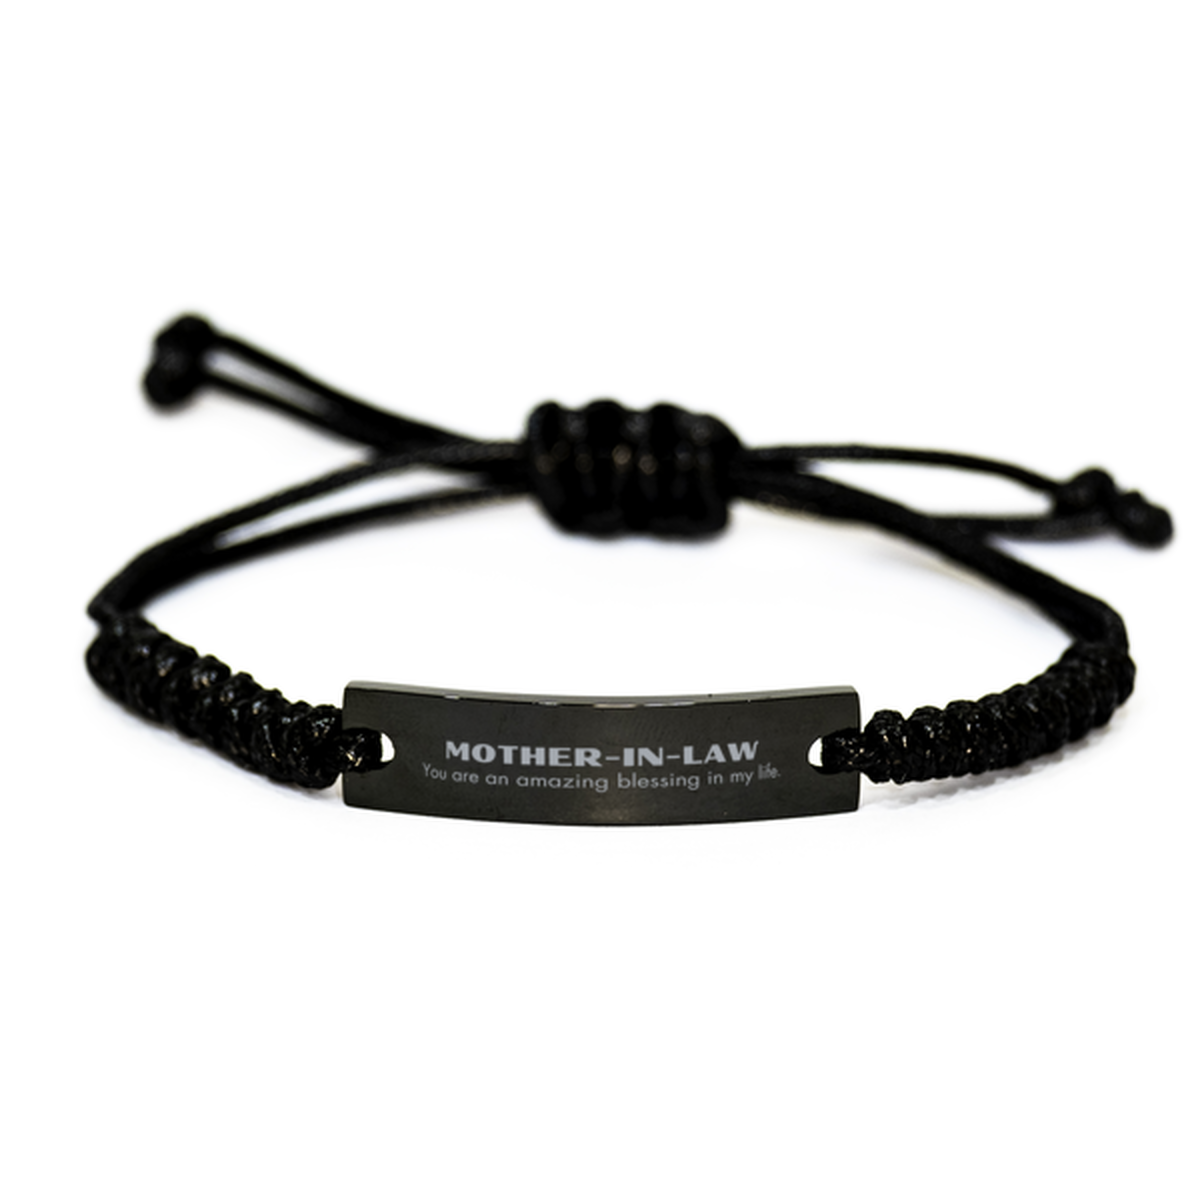 Mother-In-Law Black Rope Bracelet, You are an amazing blessing in my life, Thank You Gifts For Mother-In-Law, Inspirational Birthday Christmas Unique Gifts For Mother-In-Law